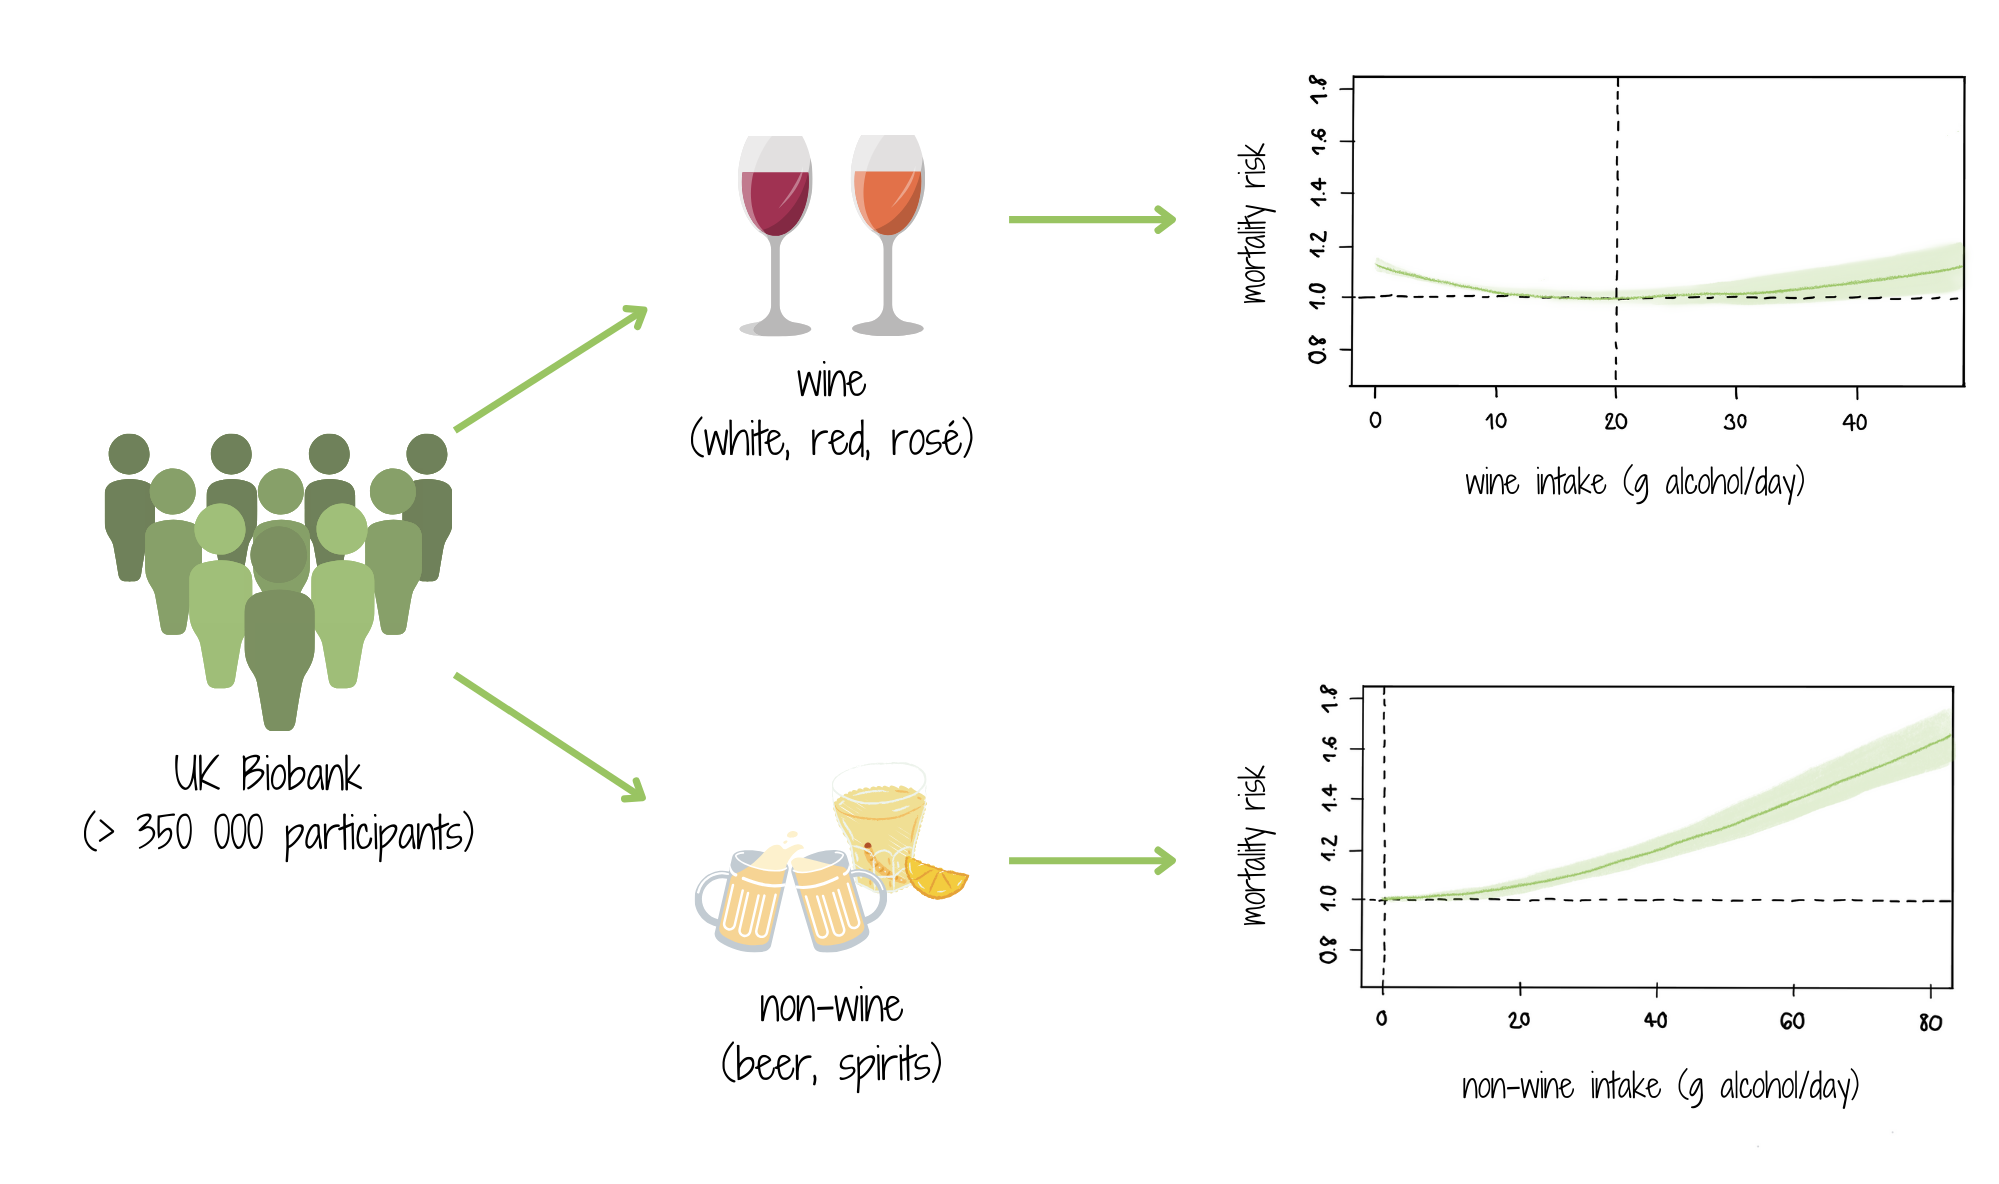 Effect of wine and non-wine on mortality